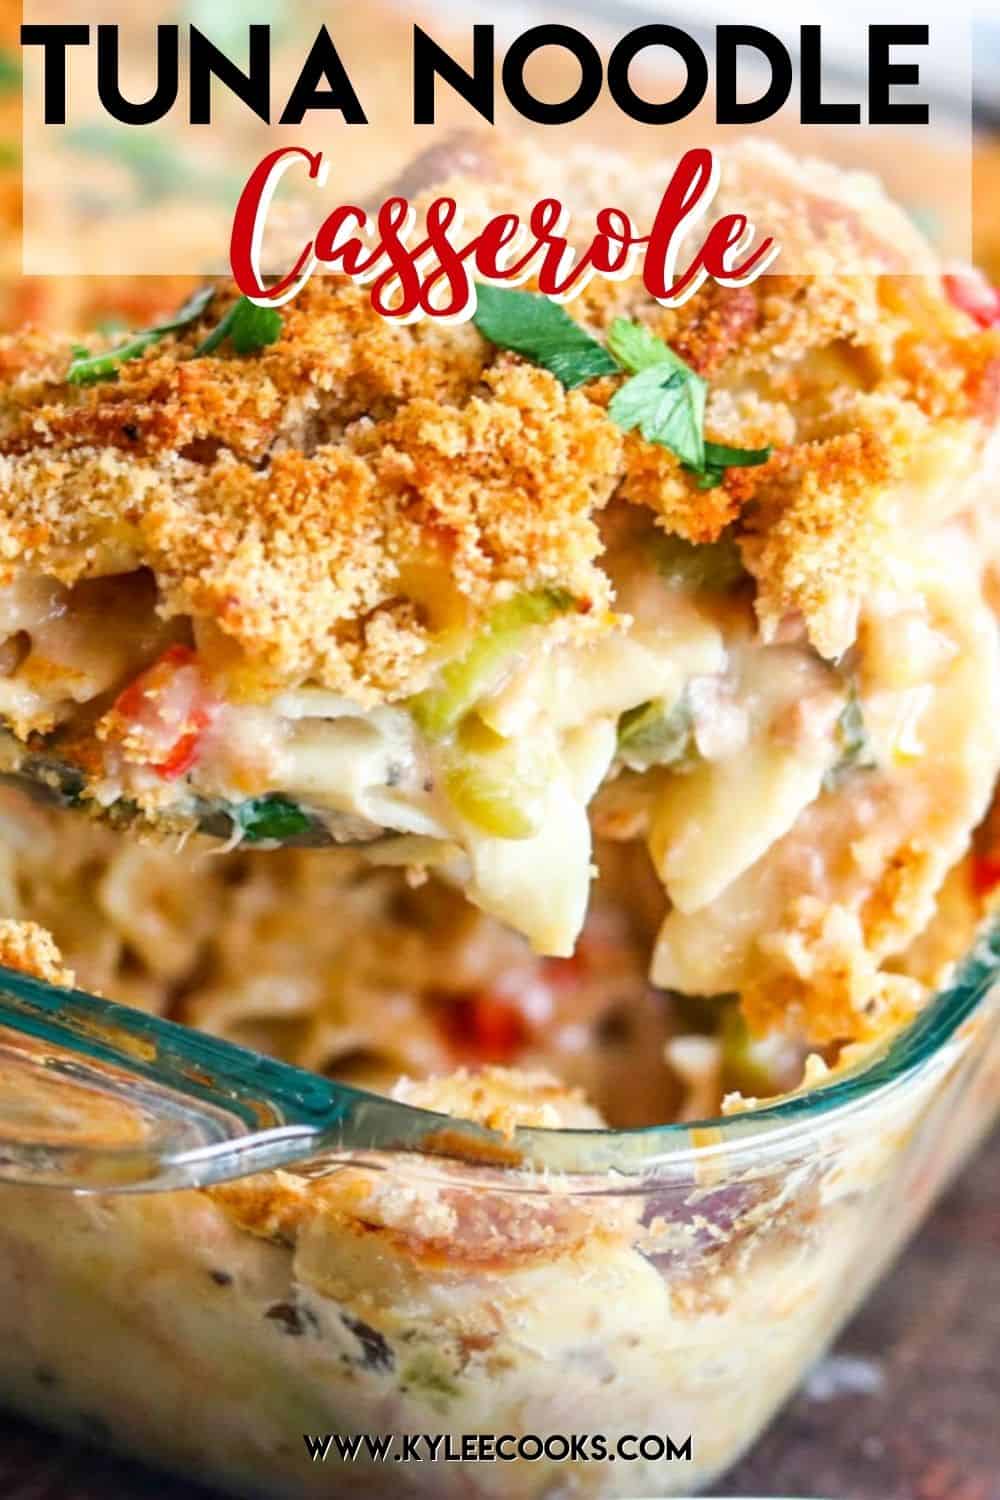 tuna noodle casserole with recipe title overlaid in text